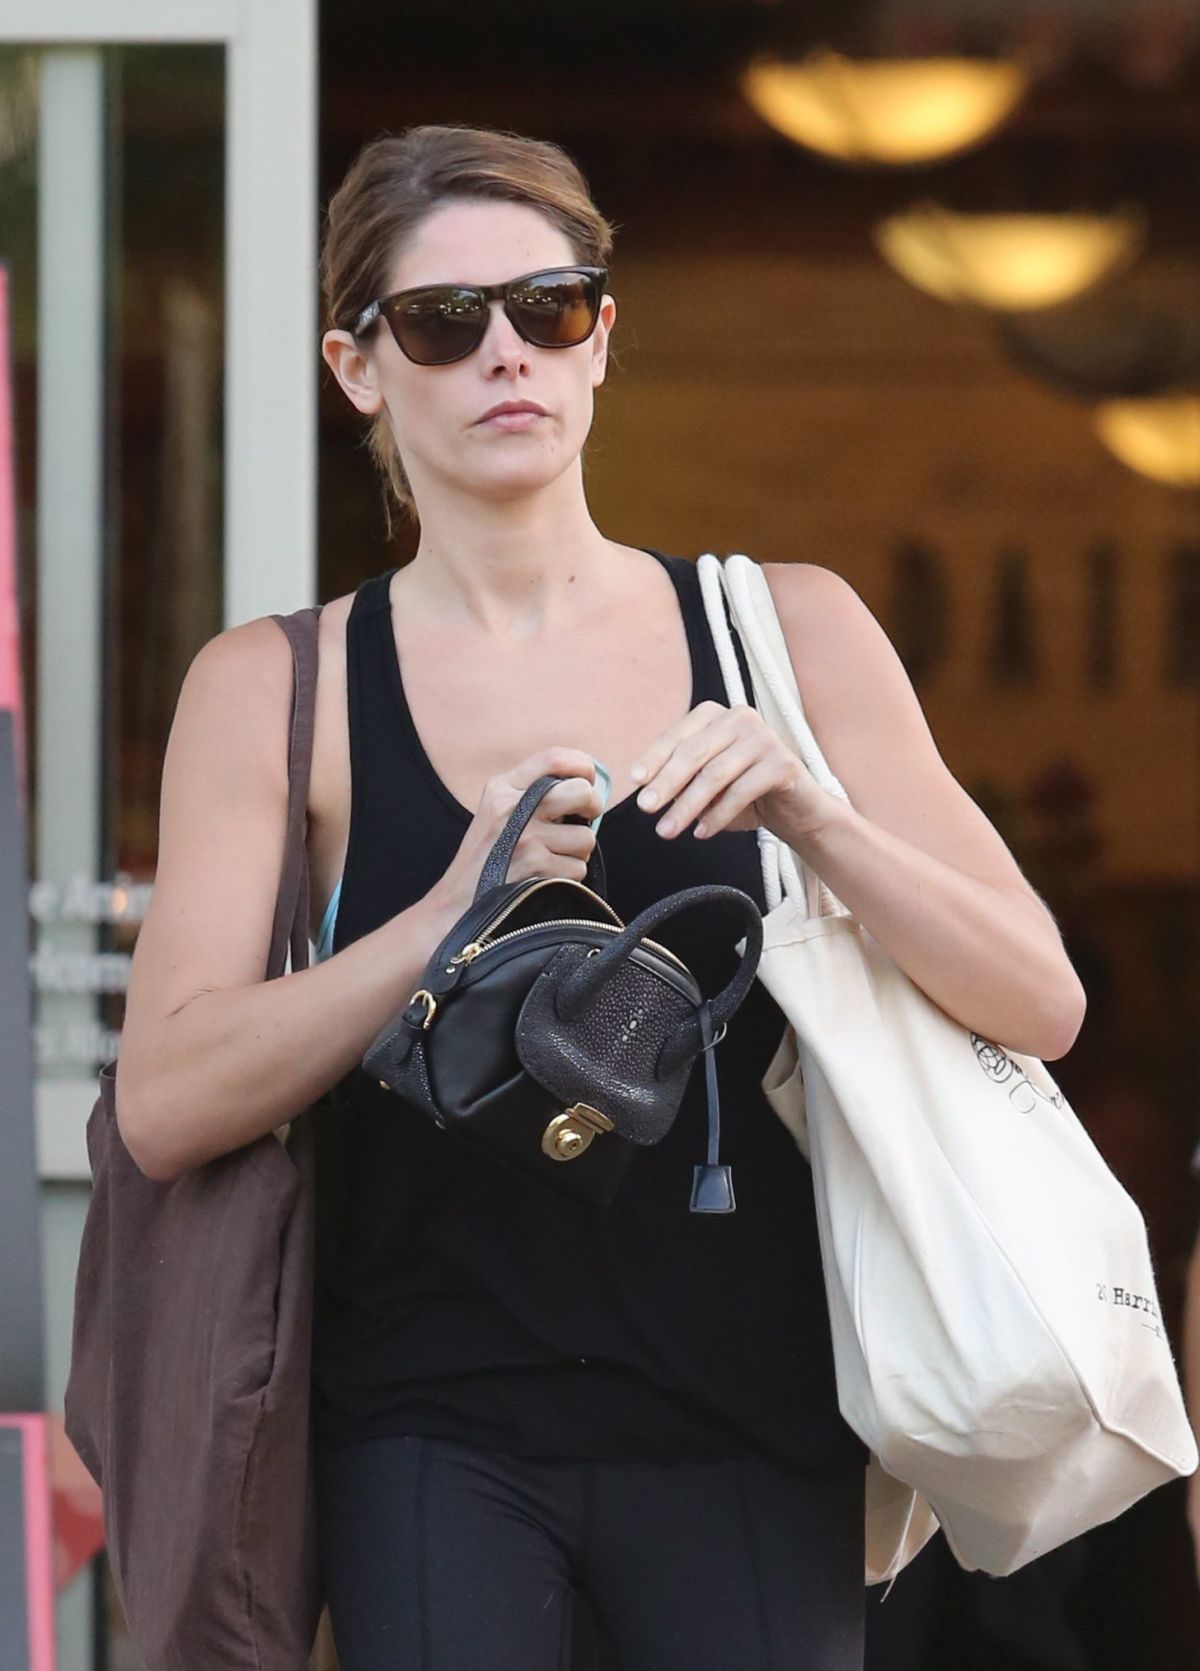 ASHLEY GREENE in Tights Shopping at Bristol Farms in West Hollywood ...